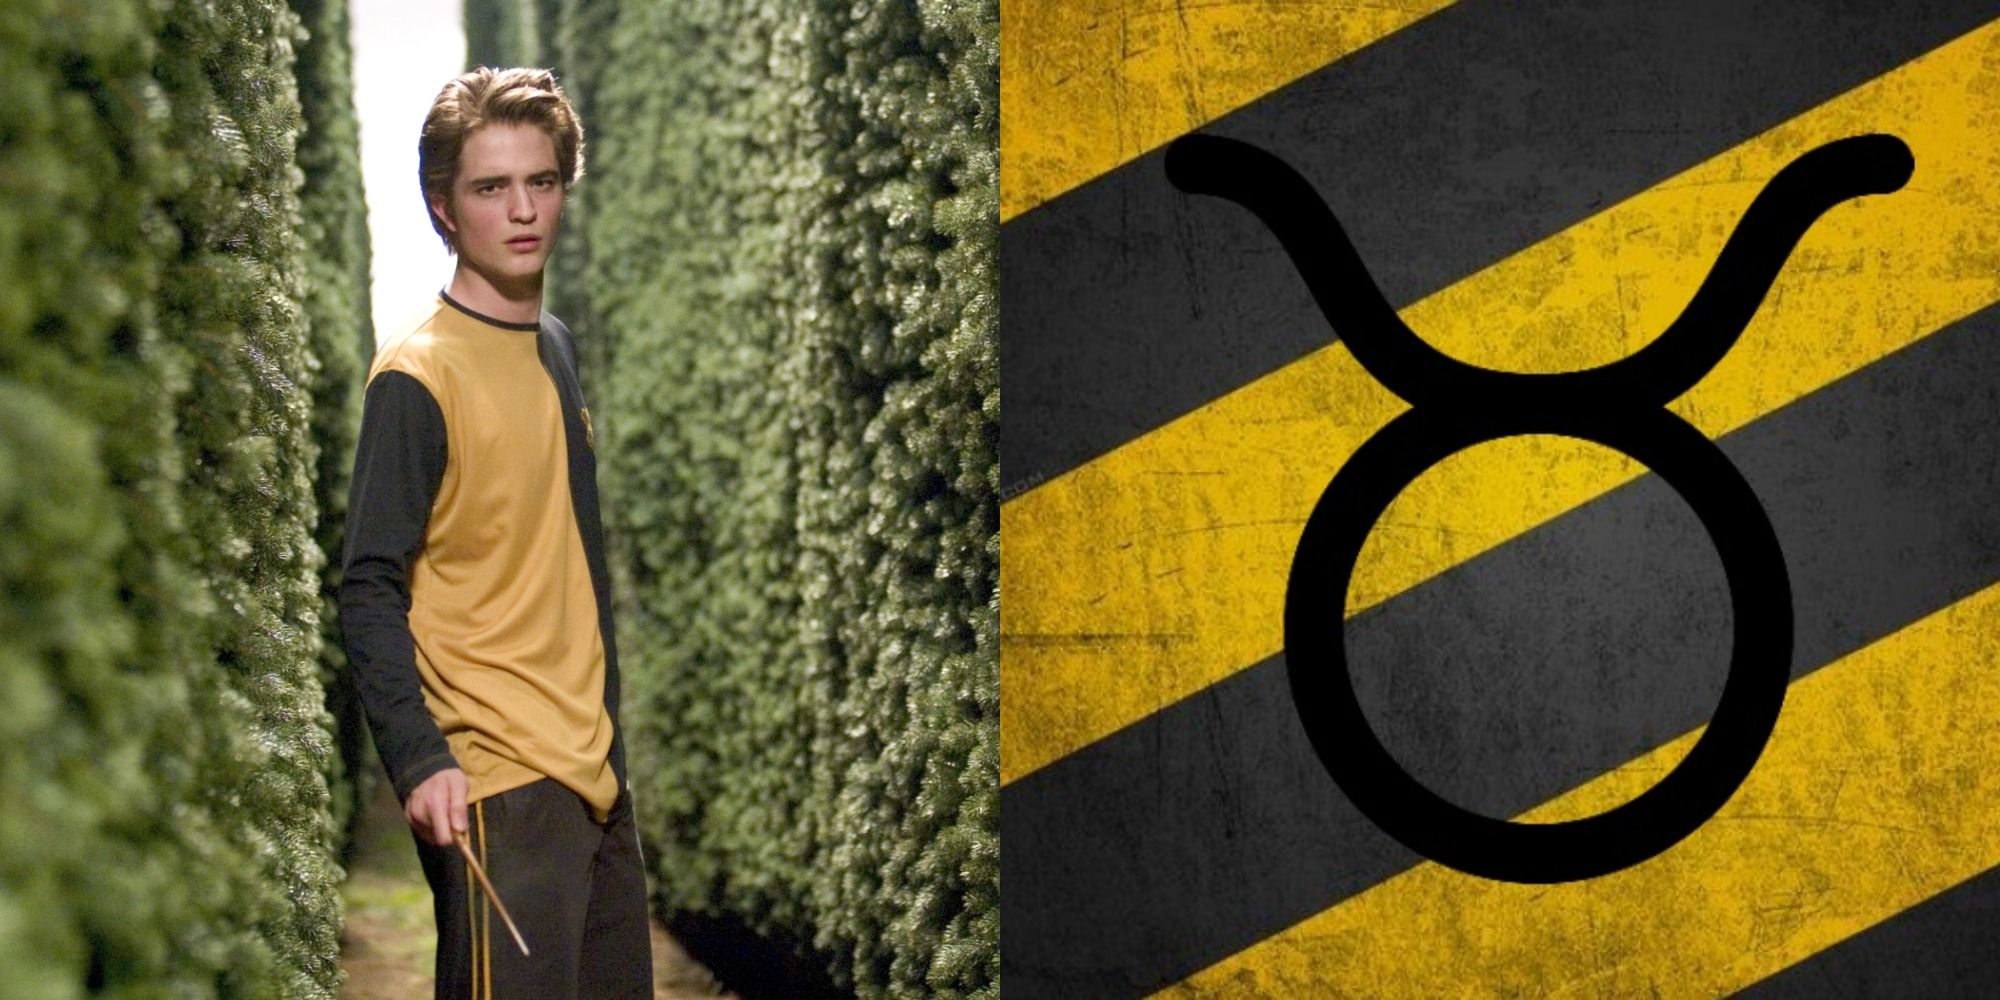 Cedric Diggory in the Maze next to the Taurus Symbol over Black and Yellow stripes